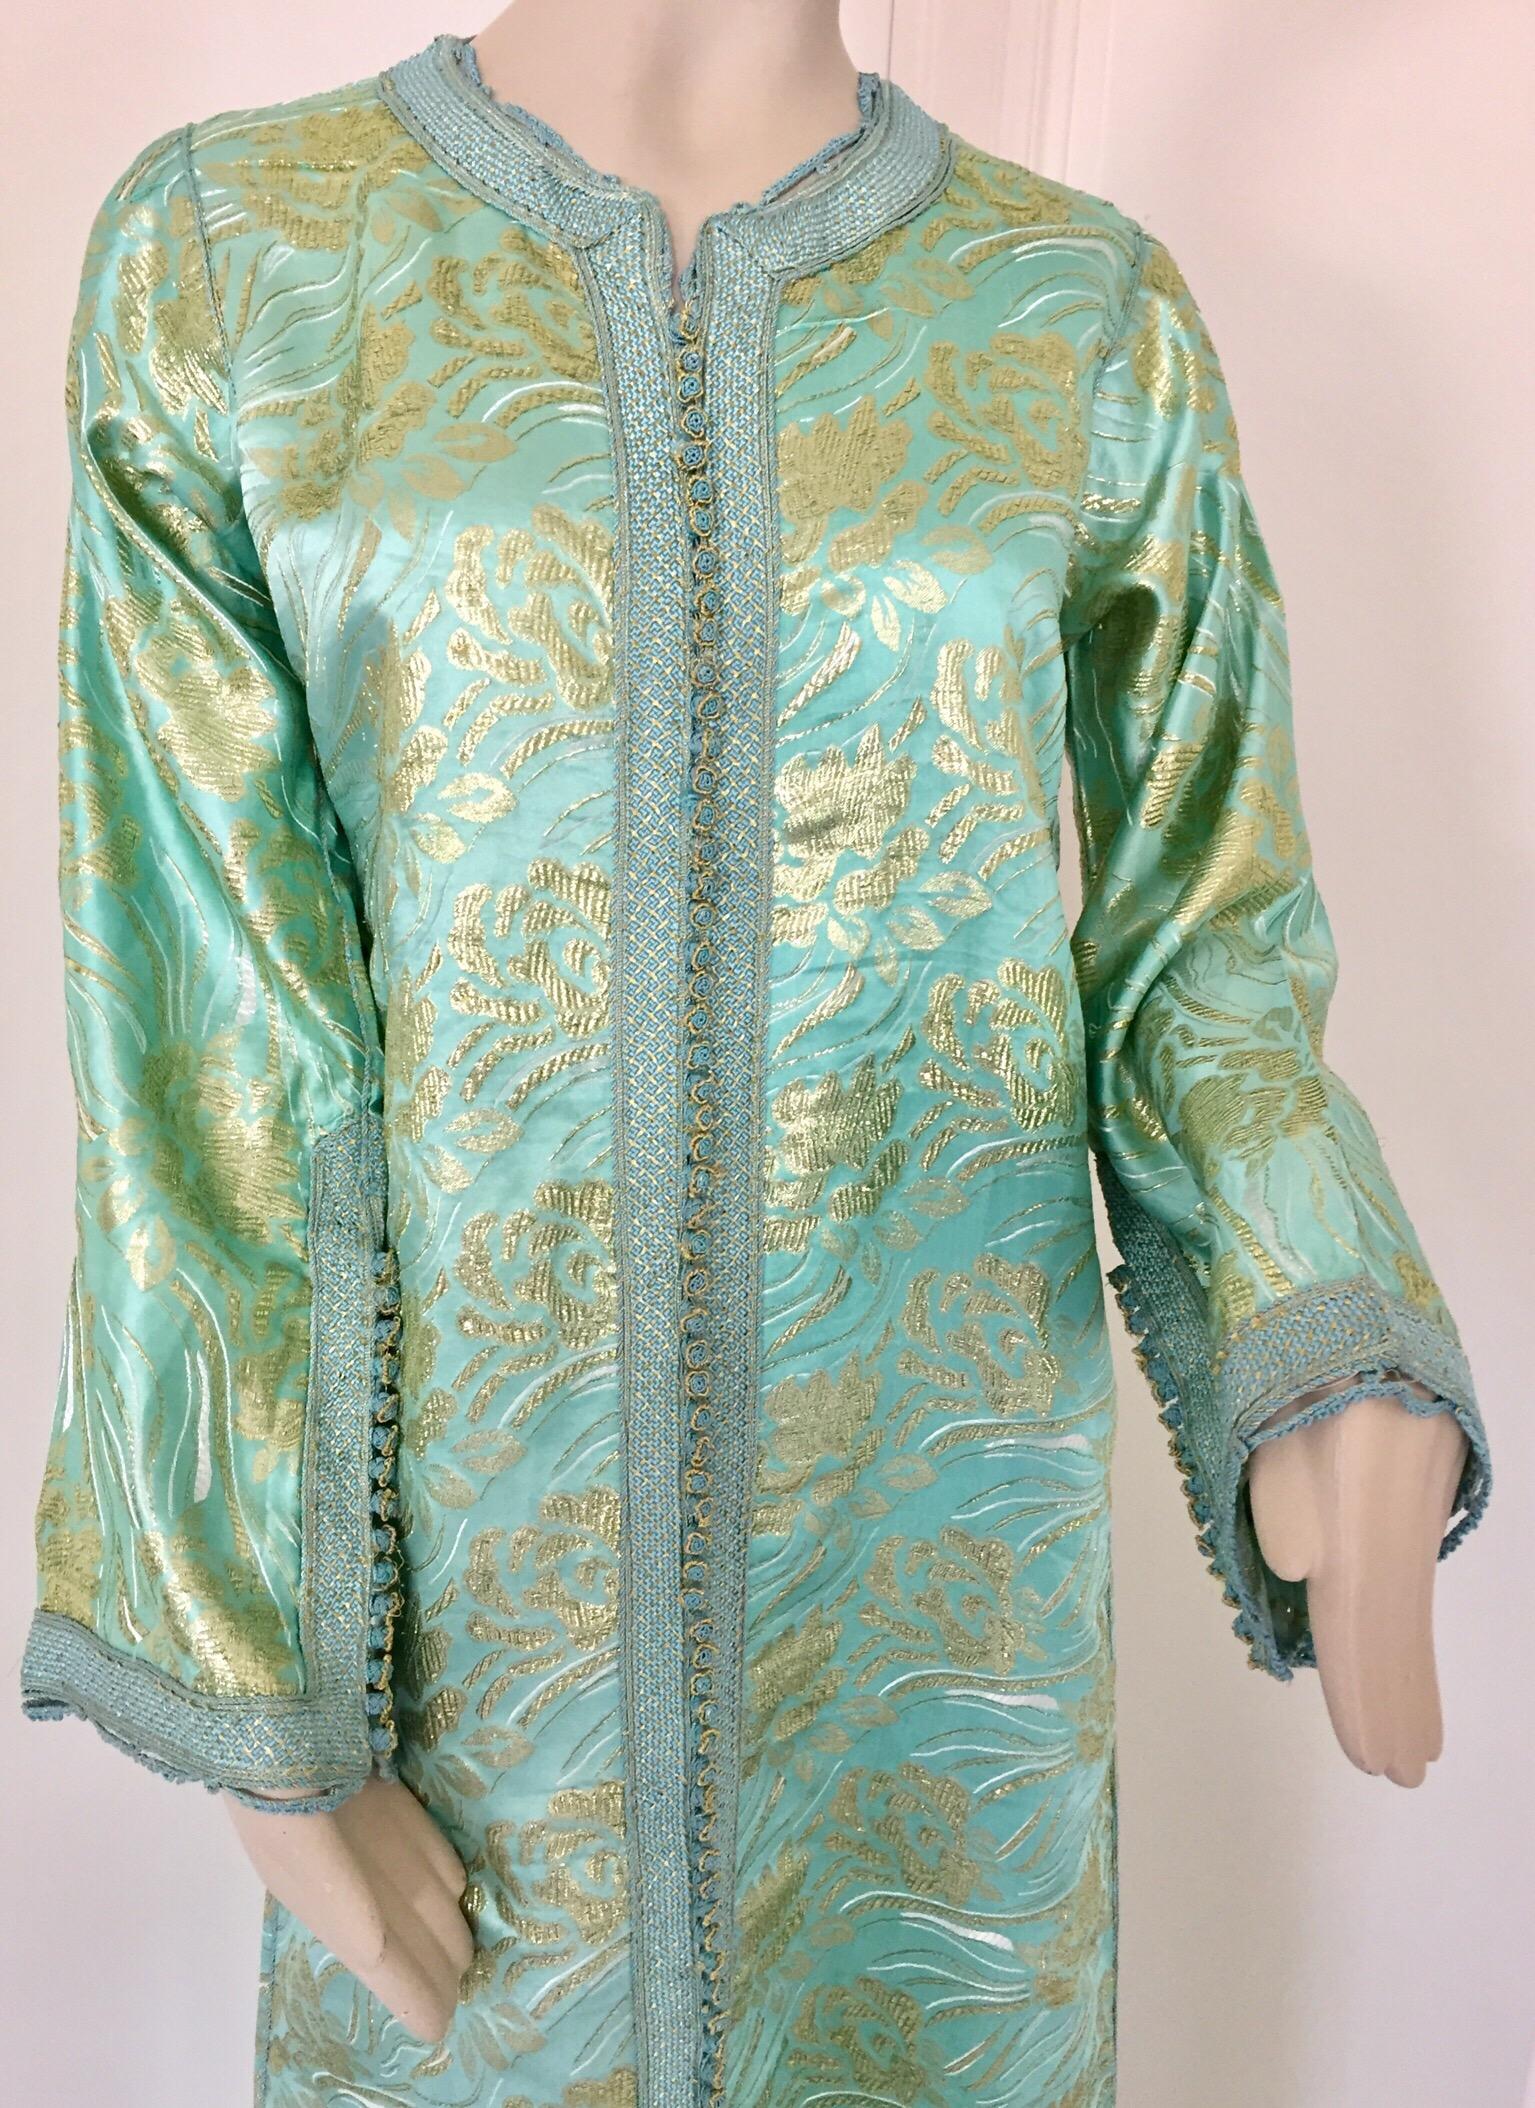 Moorish Moroccan Vintage Kaftan in Turquoise and Gold Floral Brocade Metallic Lame - 1 For Sale